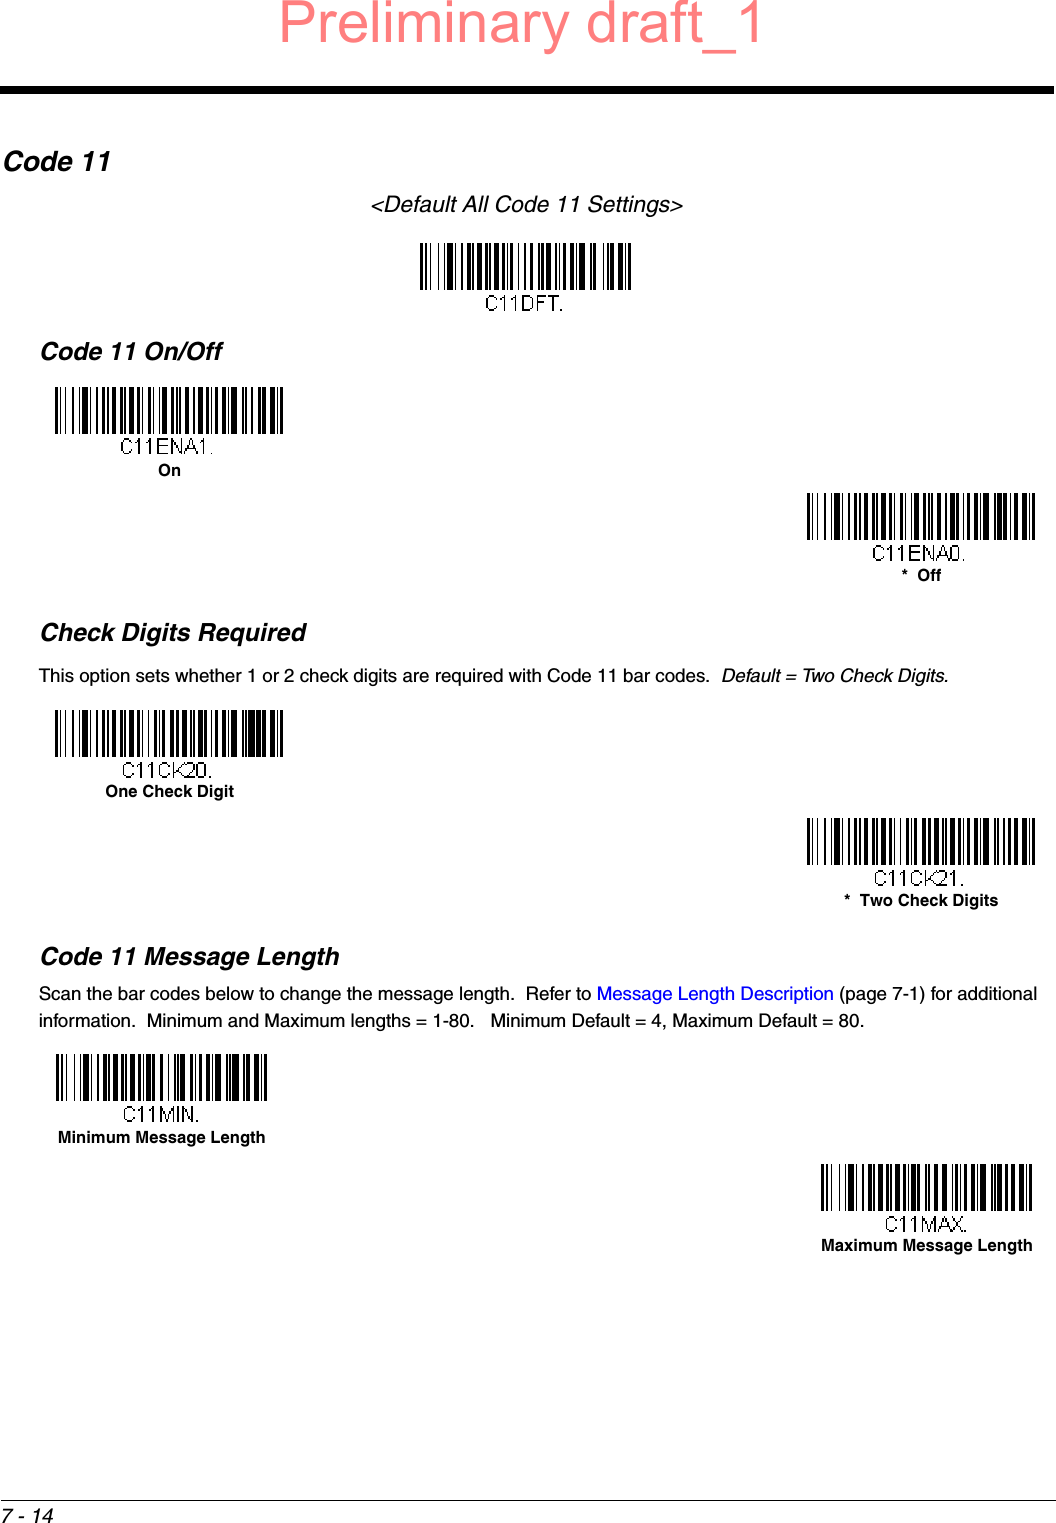 7 - 14Code 11&lt;Default All Code 11 Settings&gt;Code 11 On/OffCheck Digits RequiredThis option sets whether 1 or 2 check digits are required with Code 11 bar codes.  Default = Two Check Digits.Code 11 Message LengthScan the bar codes below to change the message length.  Refer to Message Length Description (page 7-1) for additional information.  Minimum and Maximum lengths = 1-80.   Minimum Default = 4, Maximum Default = 80.On*  OffOne Check Digit*  Two Check DigitsMinimum Message LengthMaximum Message LengthPreliminary draft_1